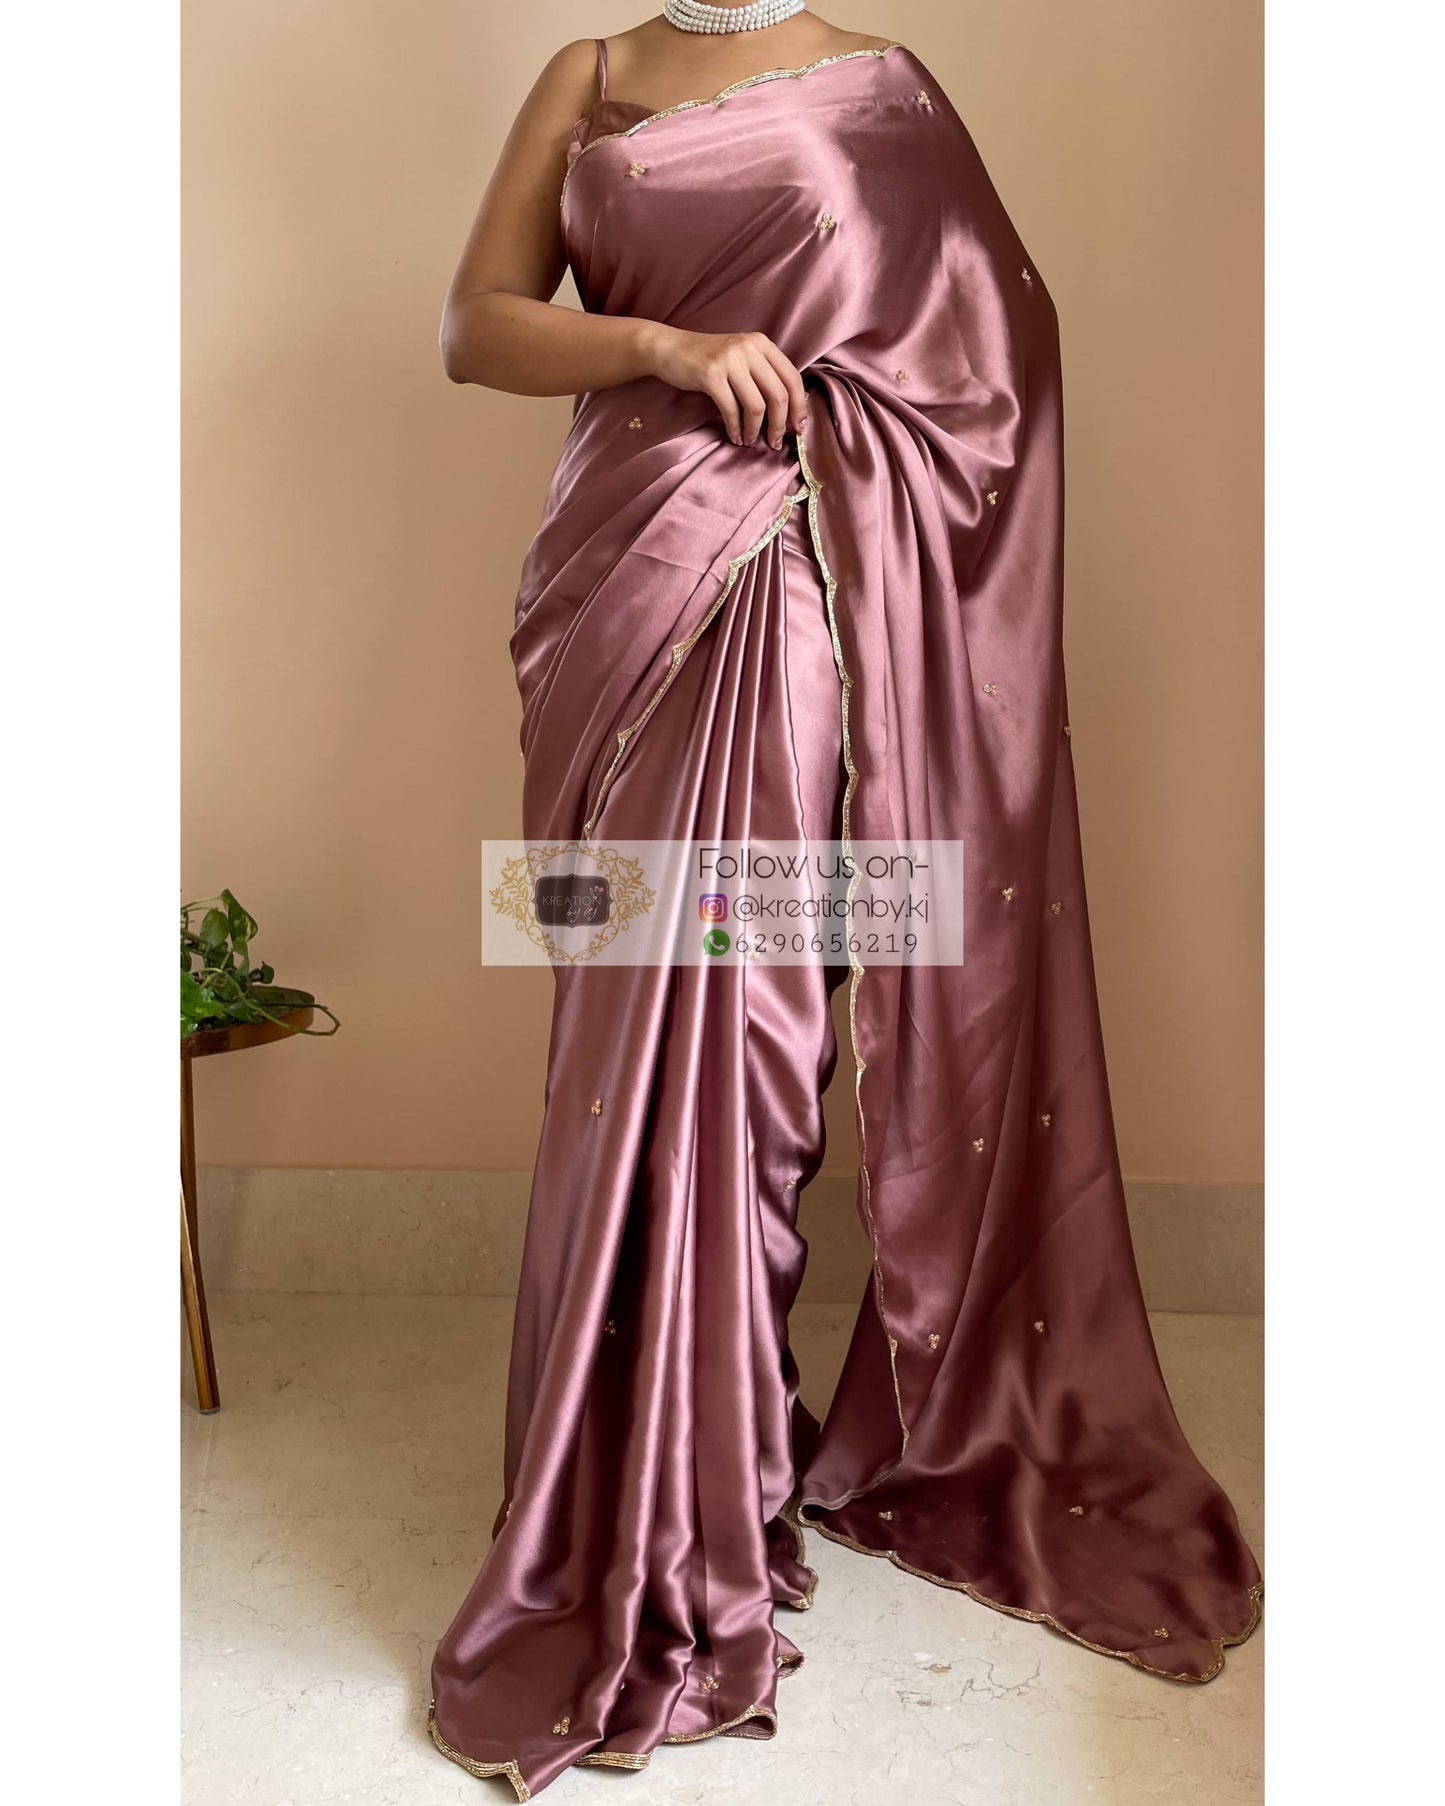 Rose Gold Satin Silk Saree With Handembroidered Scalloping - kreationbykj